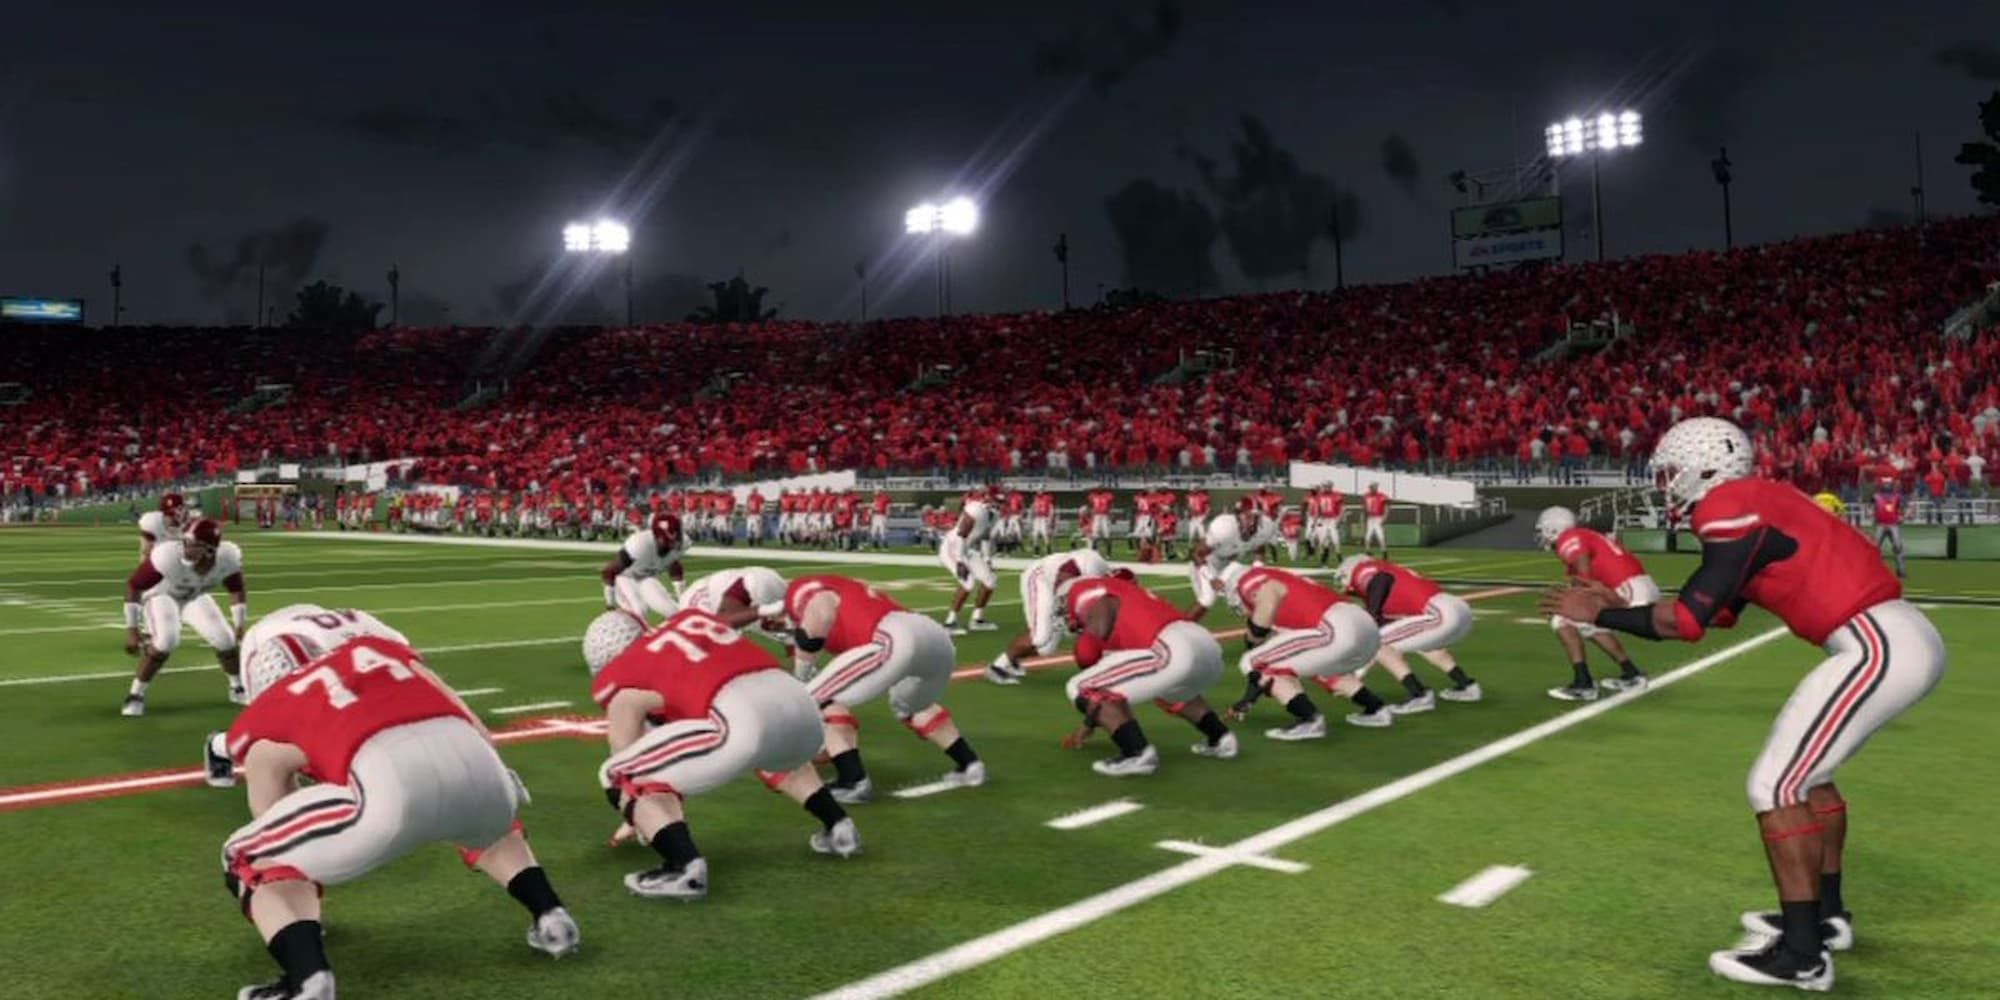 In NCAA Football 14, the Ohio State quarterback gets ready to snap the ball.